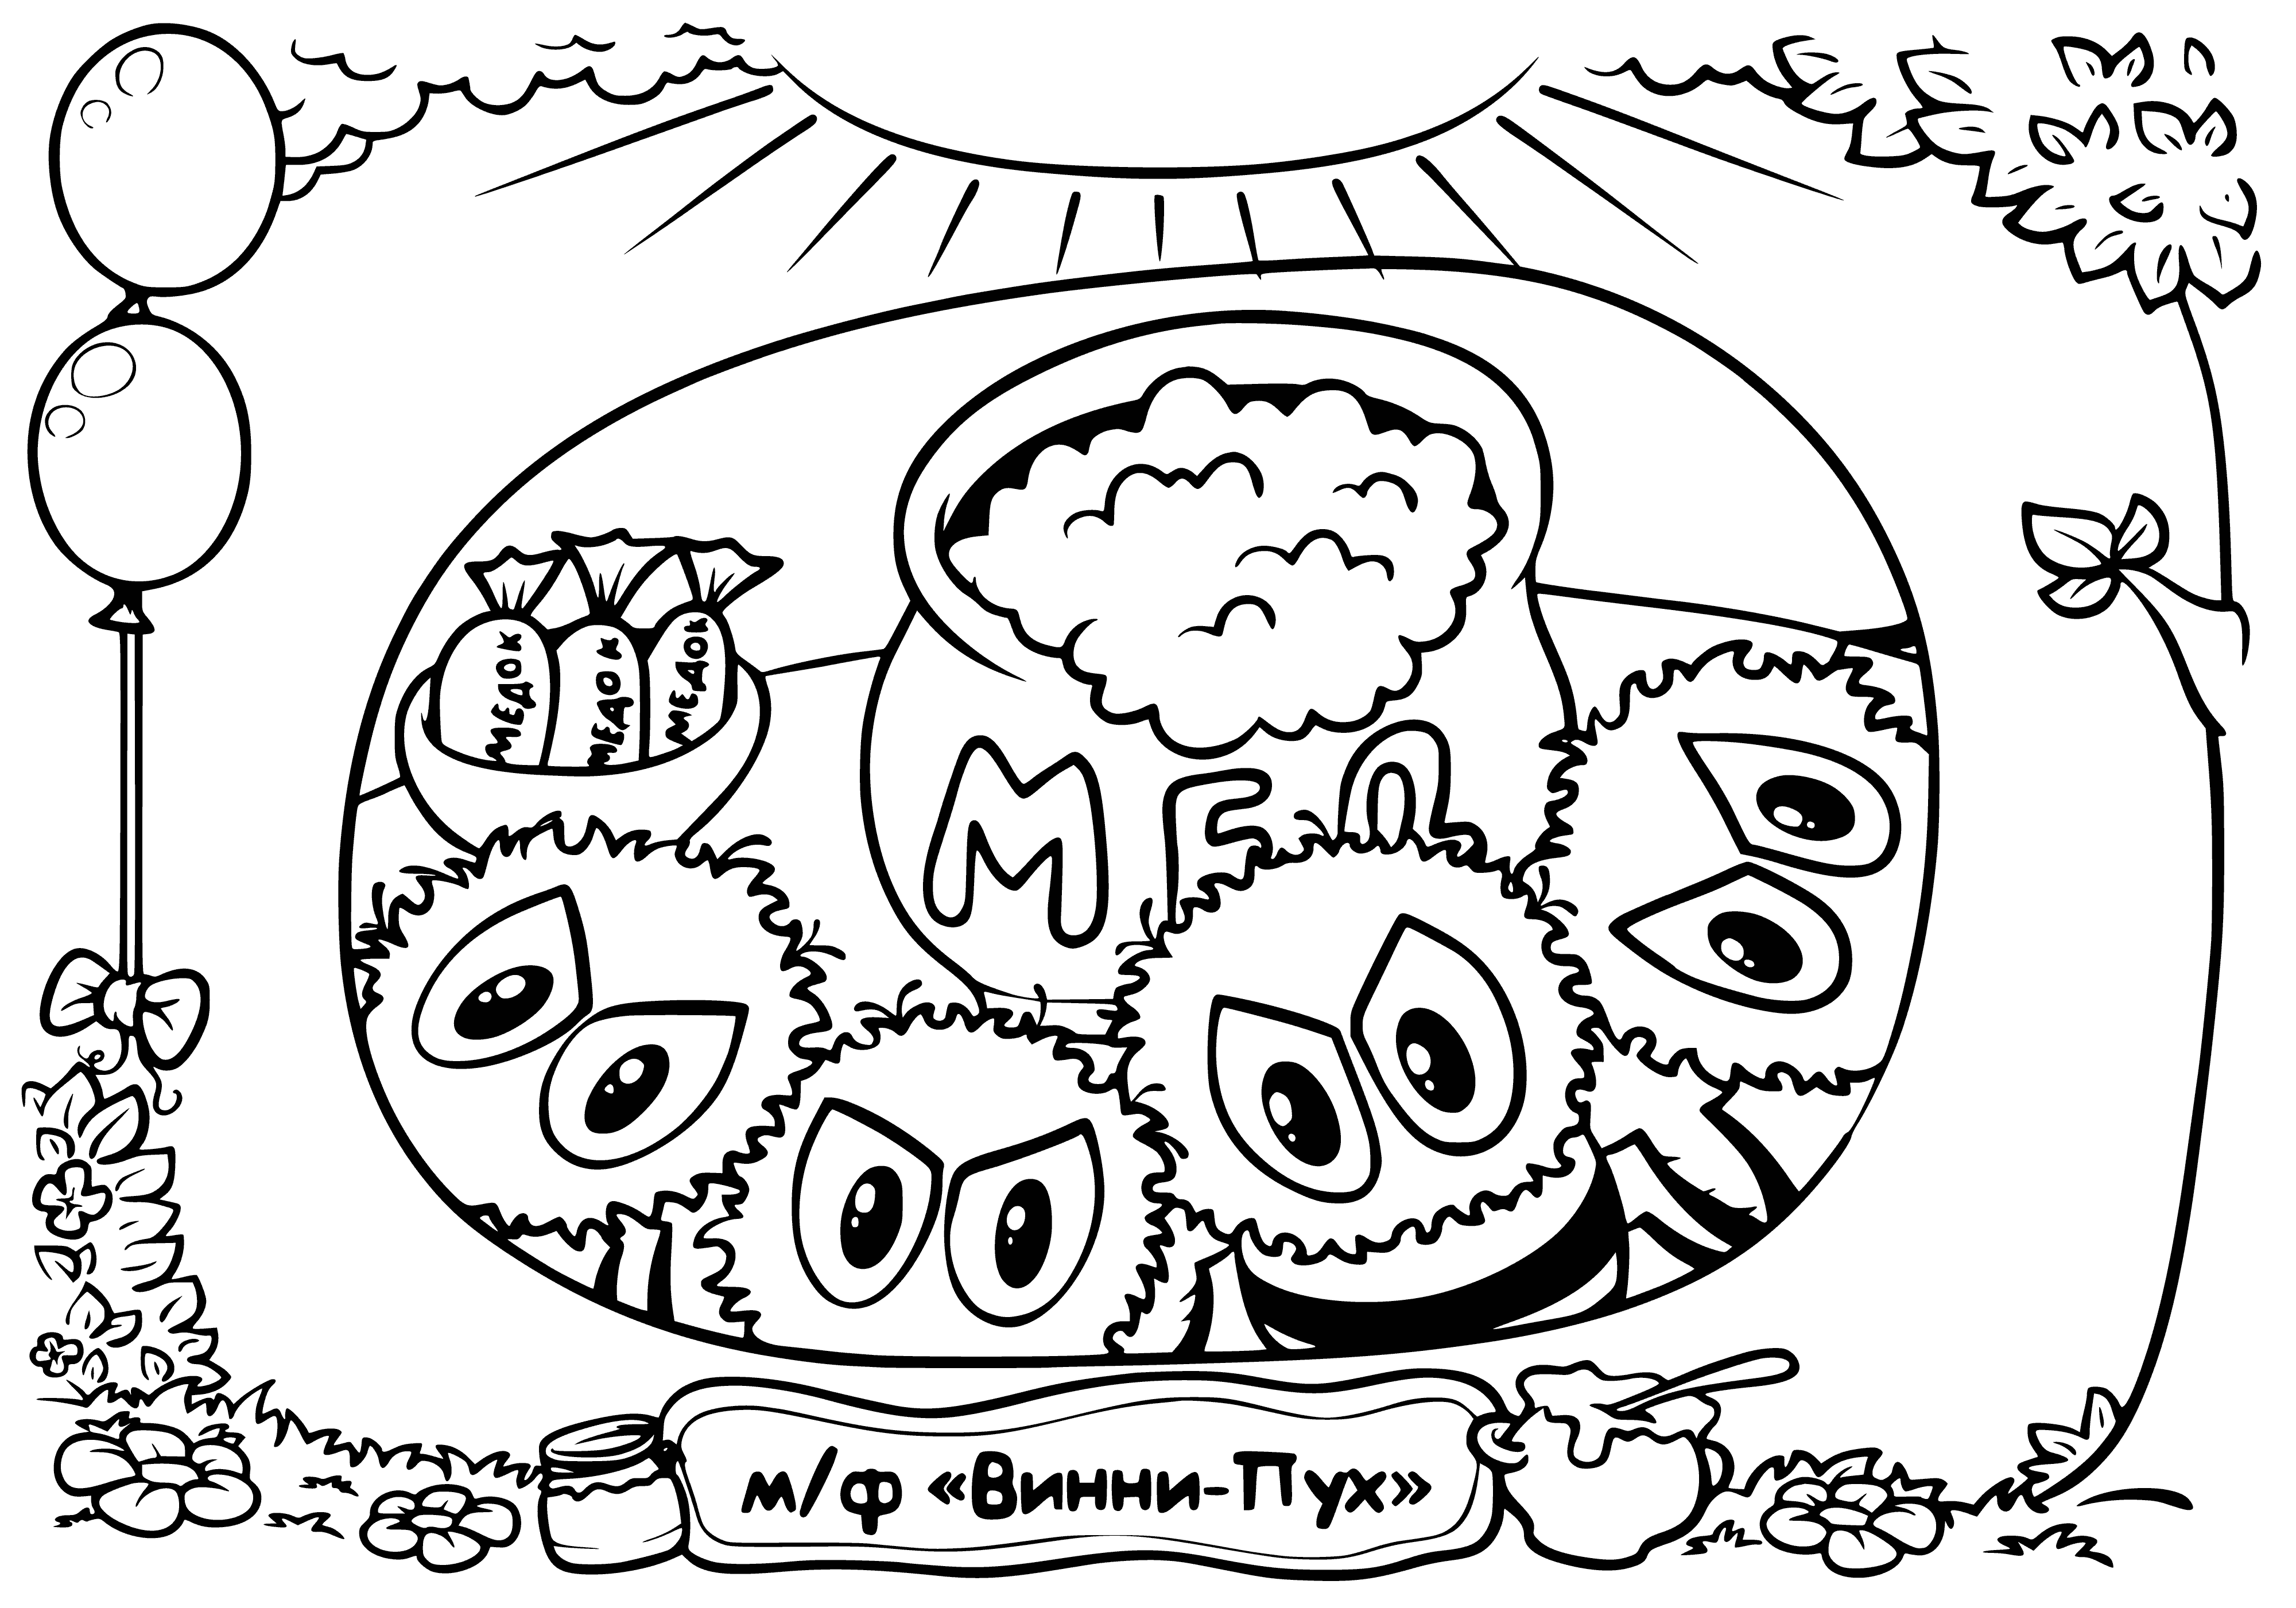 coloring page: Winnie the Pooh is surrounded by bees, holding a pot of honey as they fly around his head.